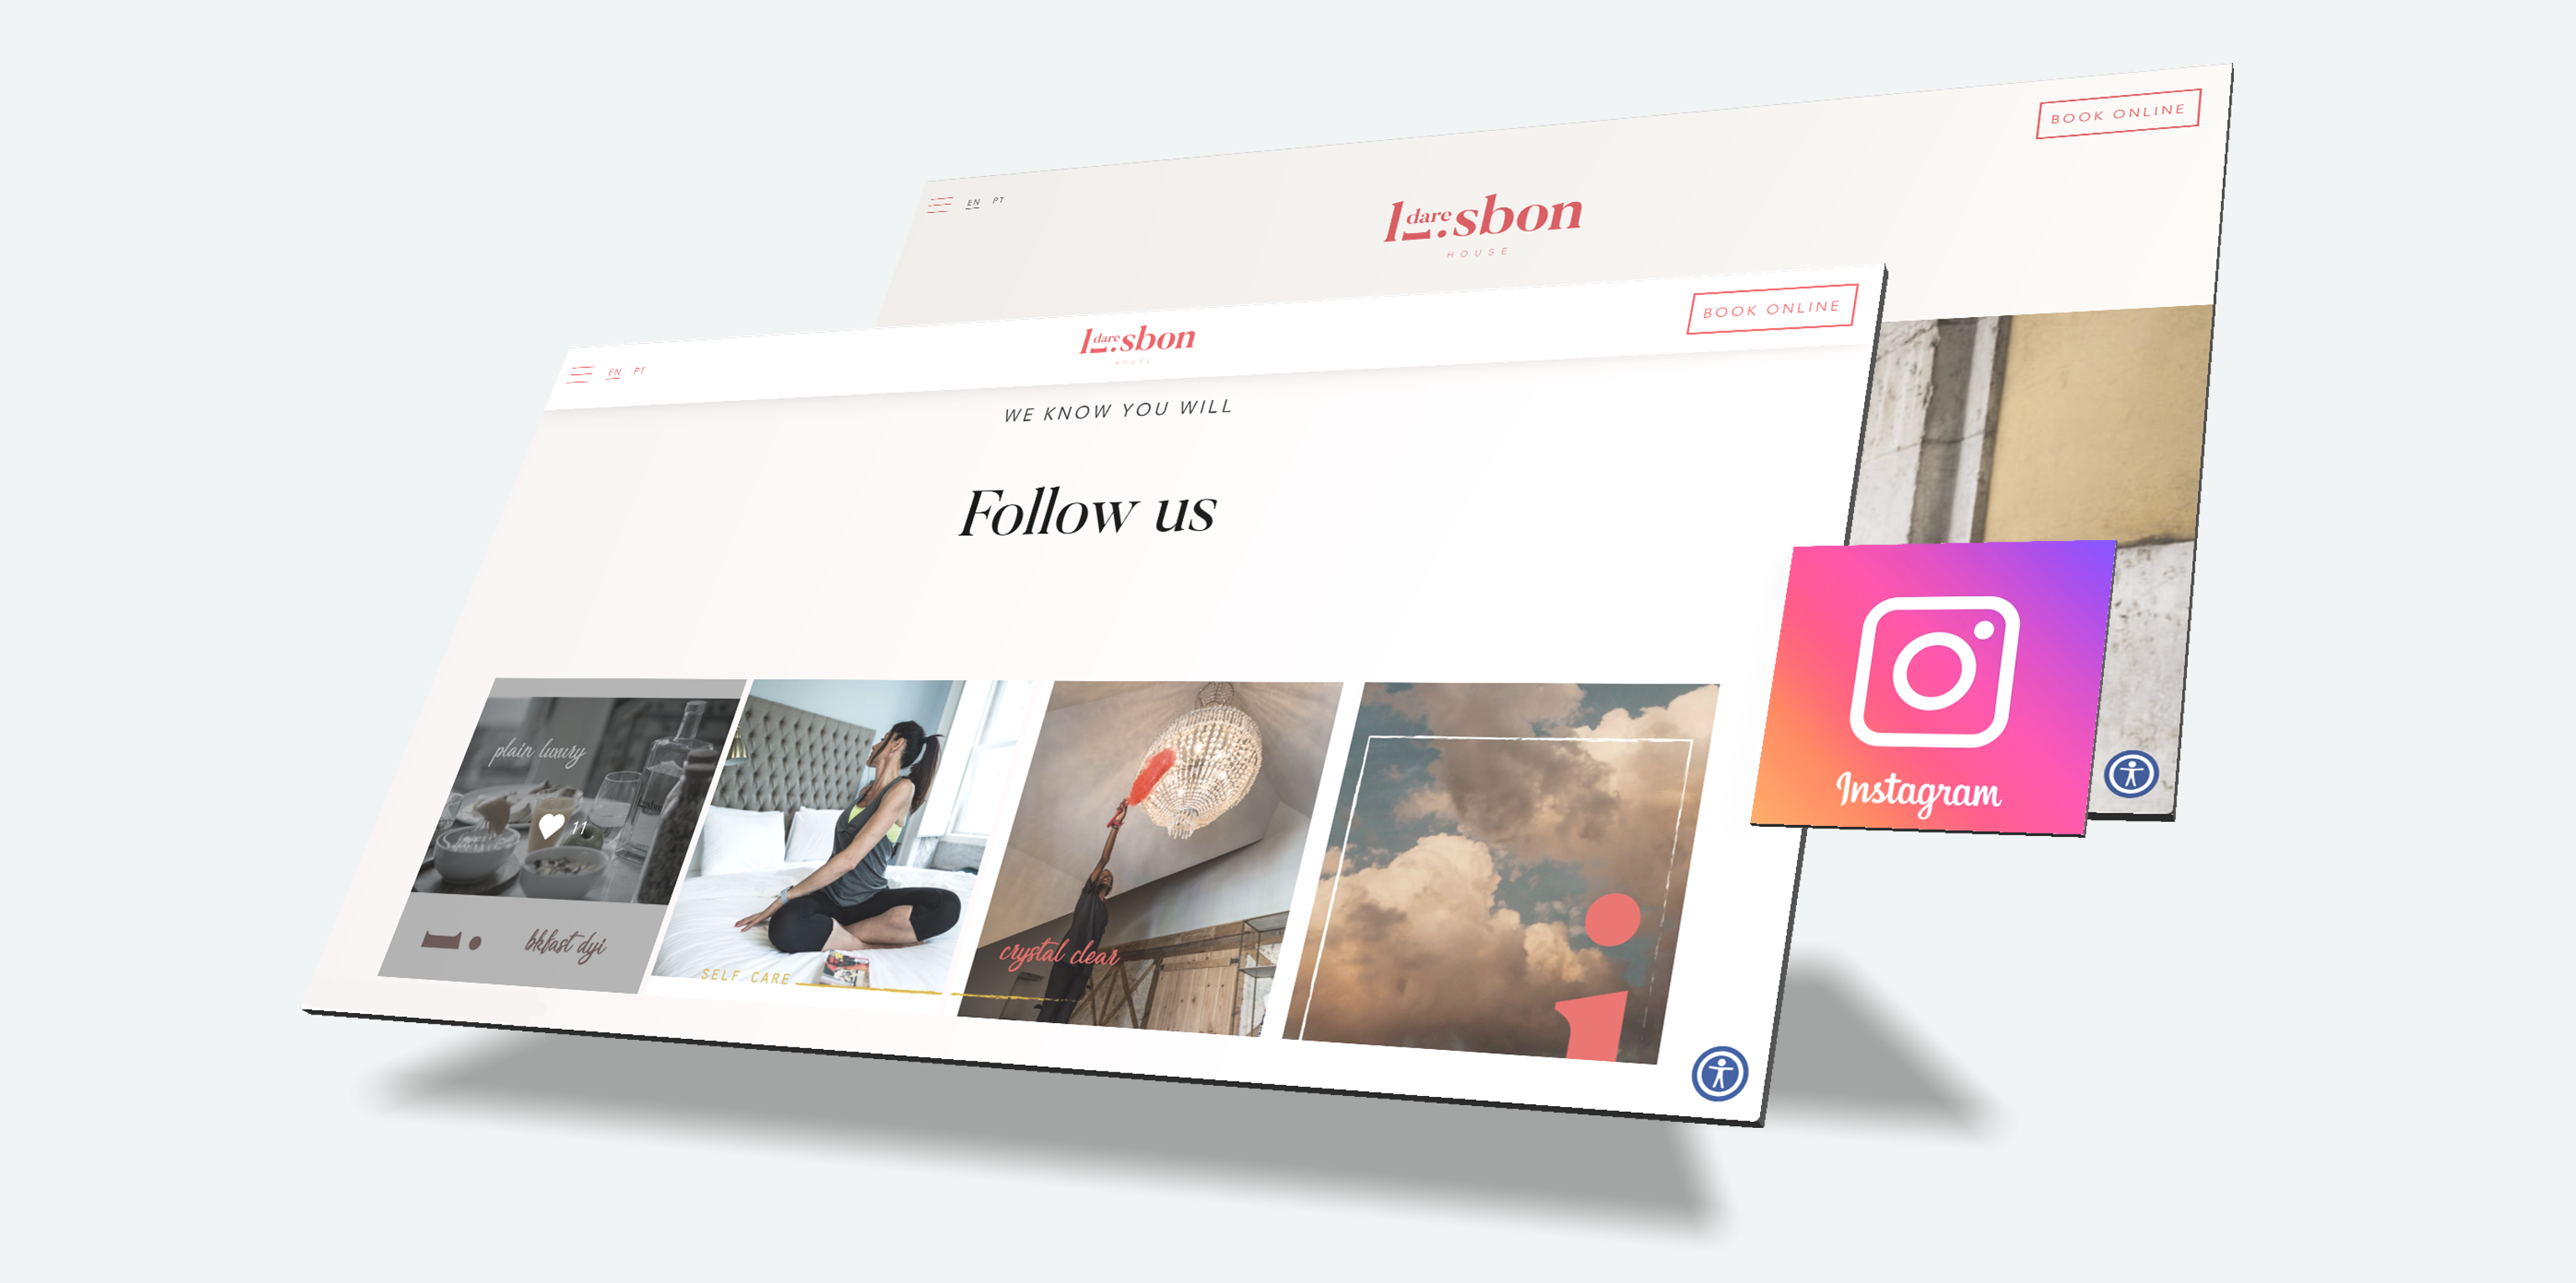 Creating a custom Instagram feed in your website